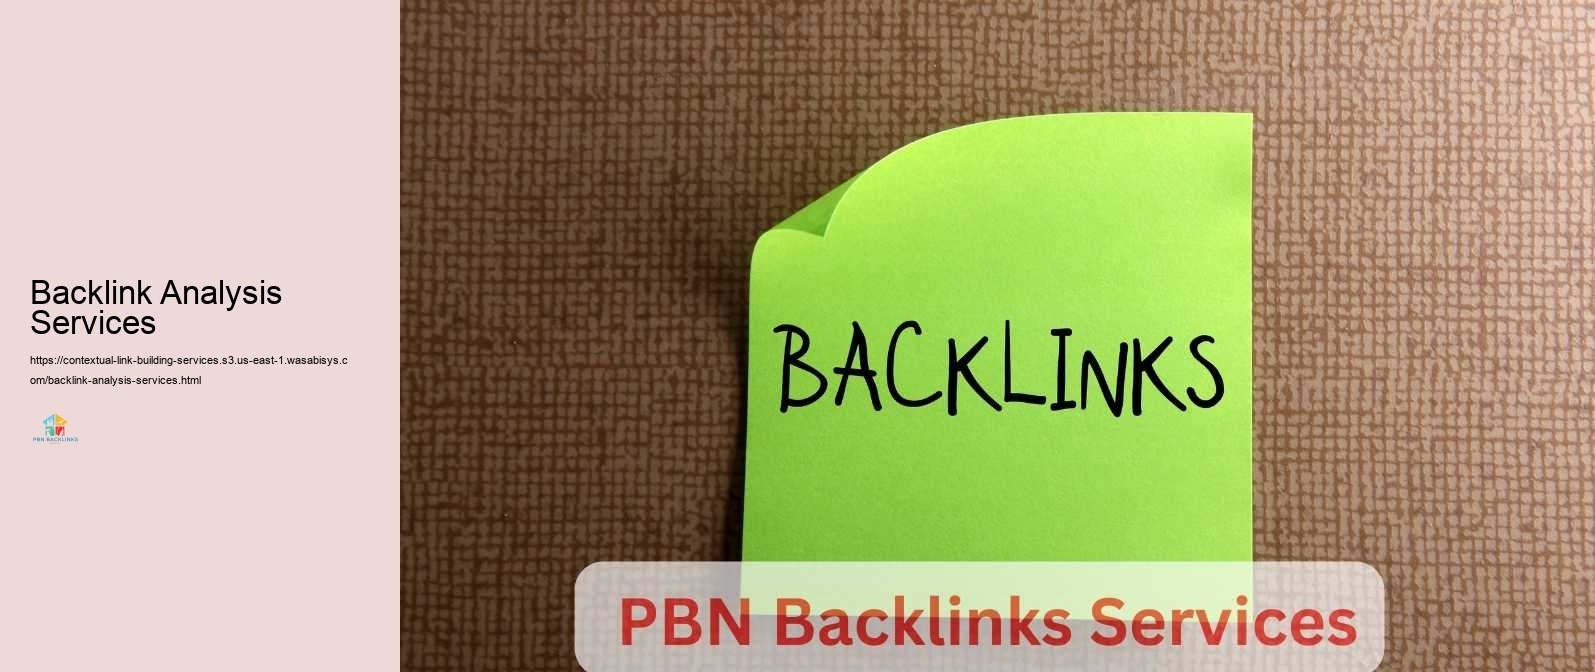 Backlink Analysis Services